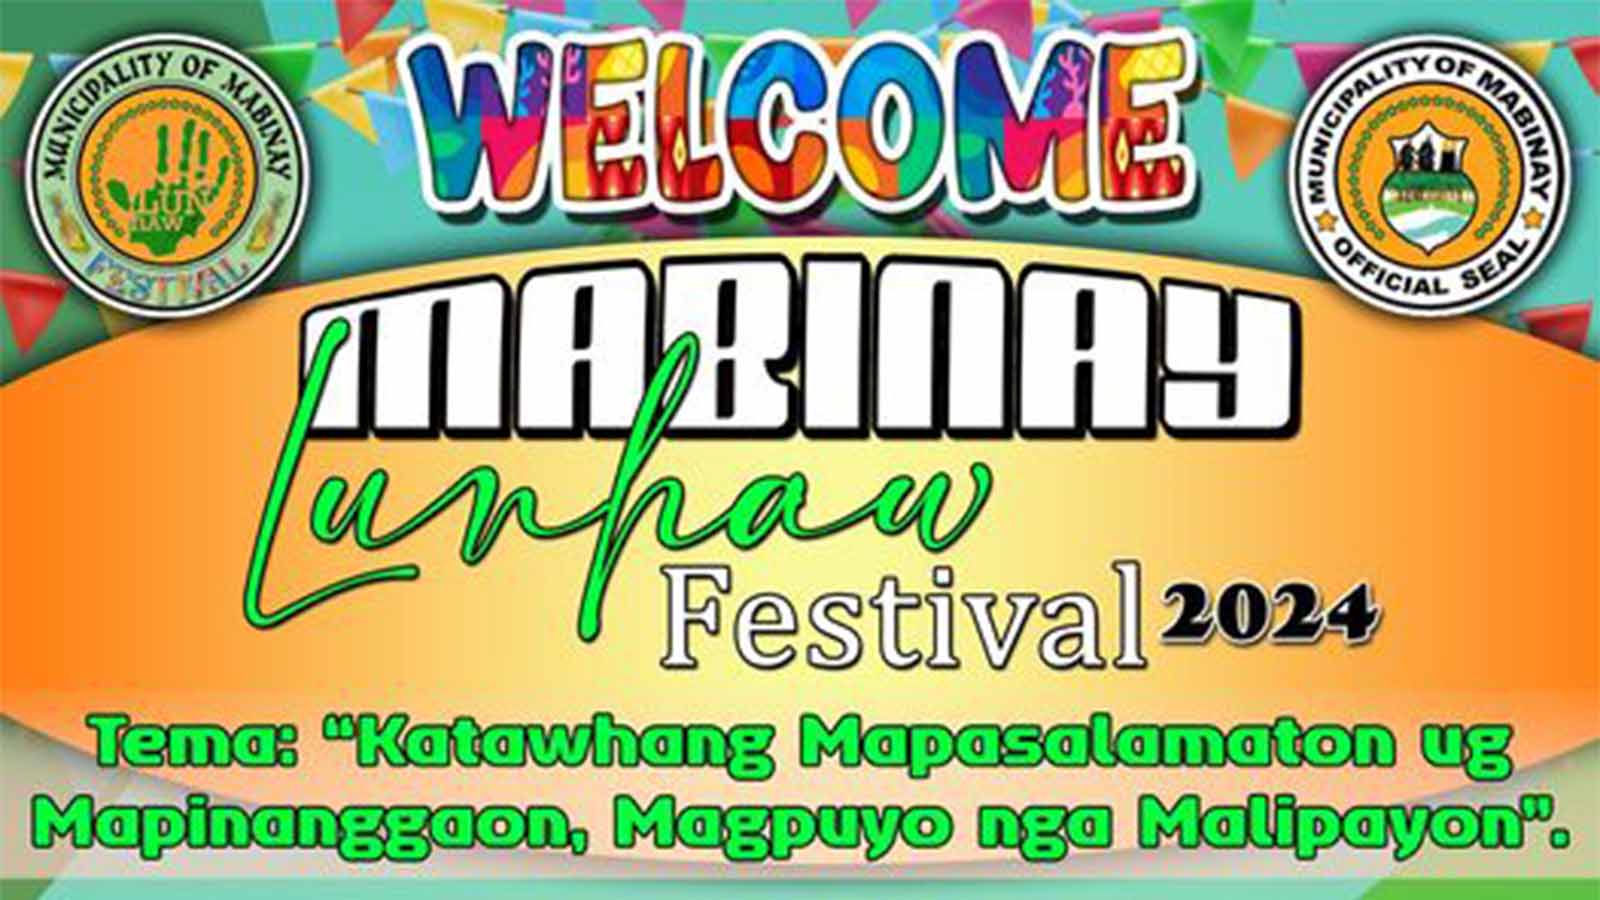 Mabinay Lunhaw Festival 2024 Schedule of Events